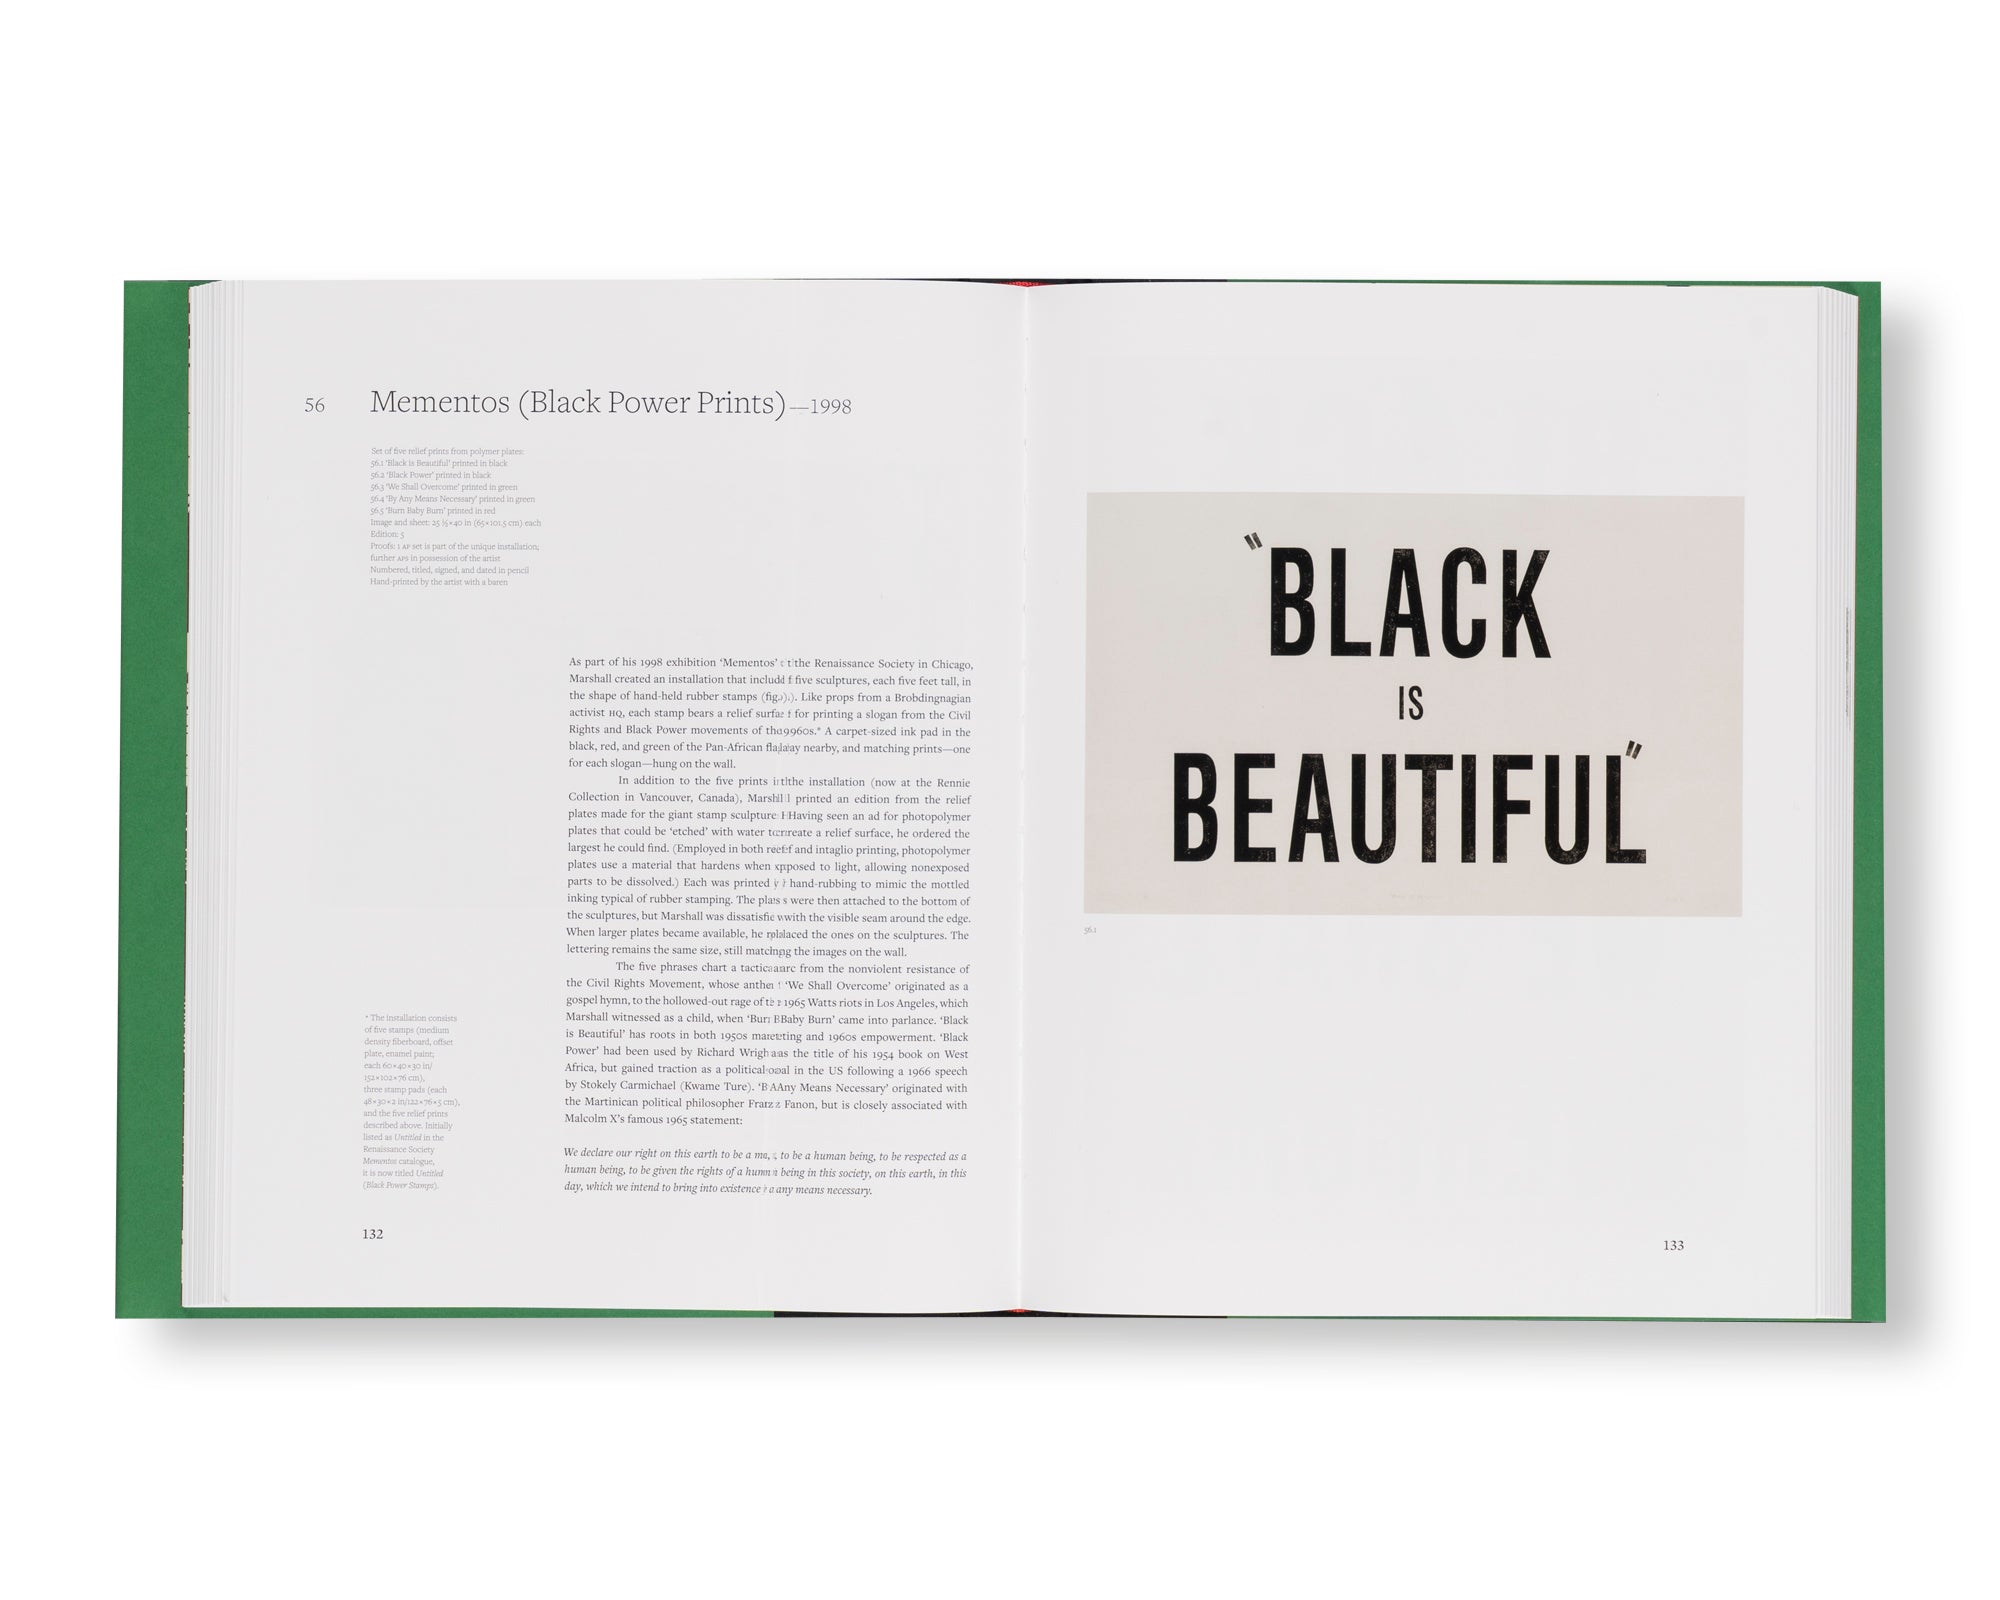 THE COMPLETE PRINTS by Kerry James Marshall